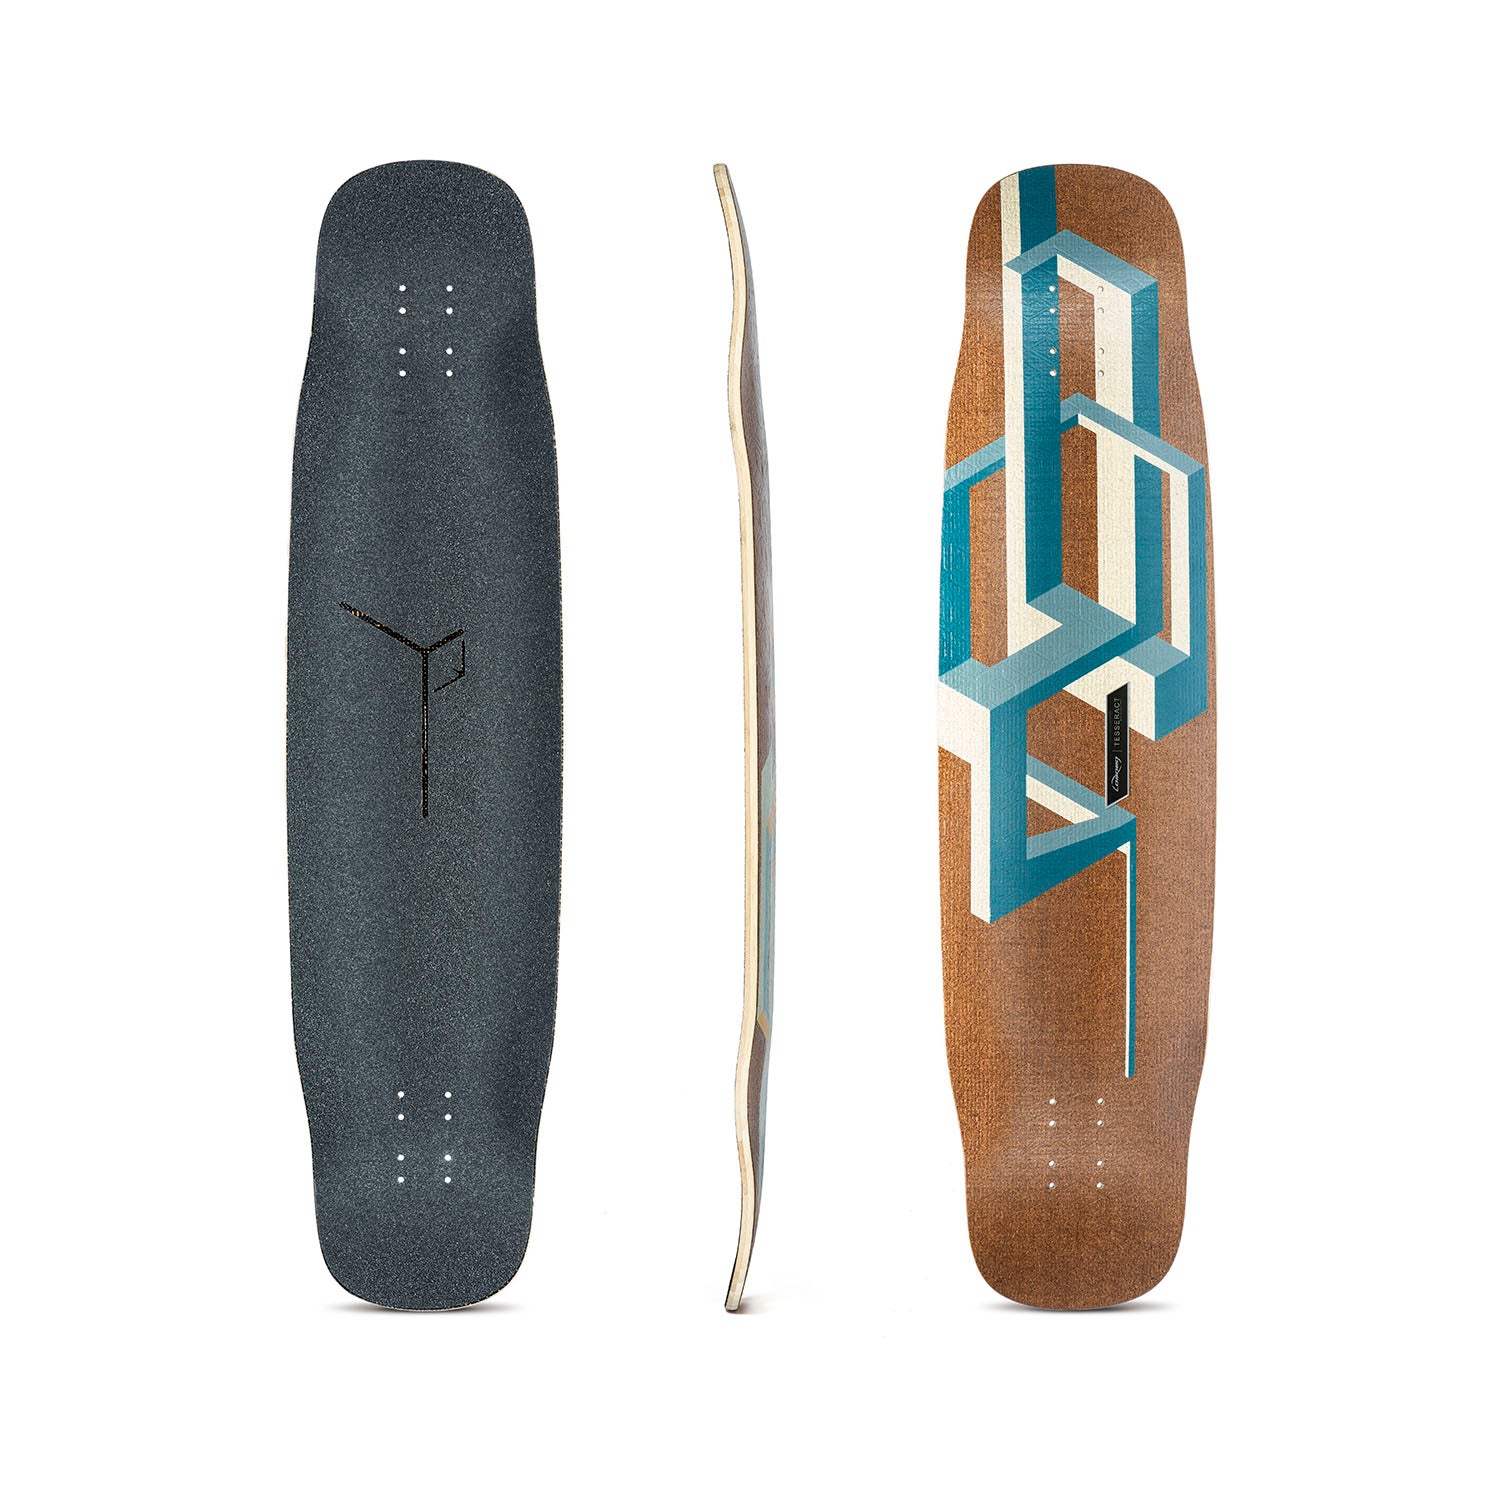 Loaded Basalt Tesseract Longboard, Deck and Complete